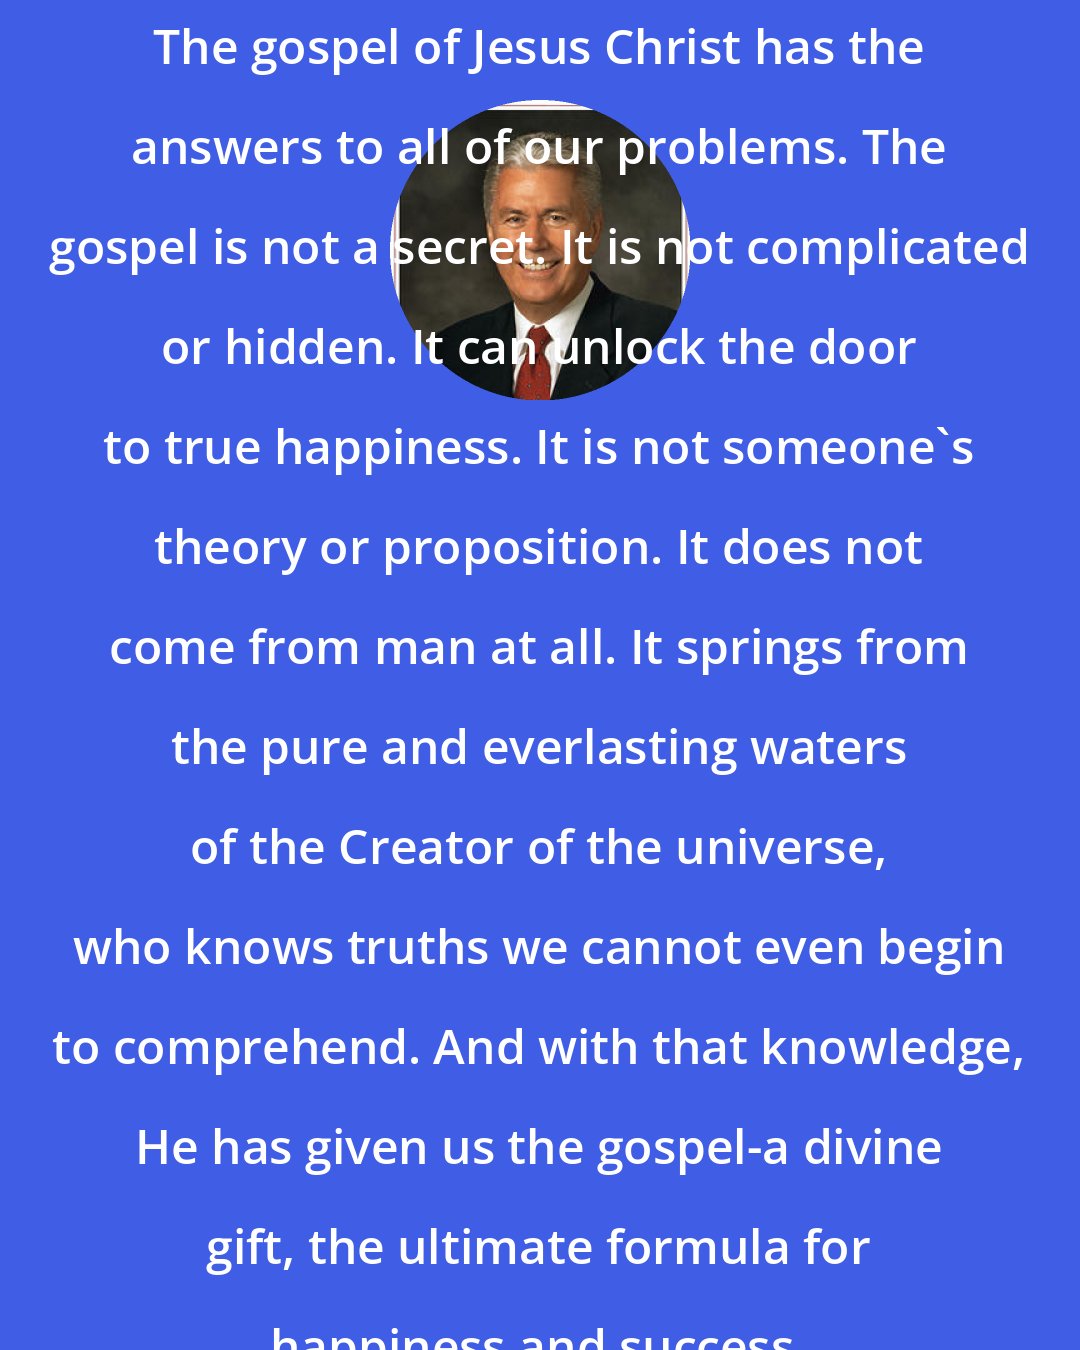 Dieter F. Uchtdorf: The gospel of Jesus Christ has the answers to all of our problems. The gospel is not a secret. It is not complicated or hidden. It can unlock the door to true happiness. It is not someone's theory or proposition. It does not come from man at all. It springs from the pure and everlasting waters of the Creator of the universe, who knows truths we cannot even begin to comprehend. And with that knowledge, He has given us the gospel-a divine gift, the ultimate formula for happiness and success.